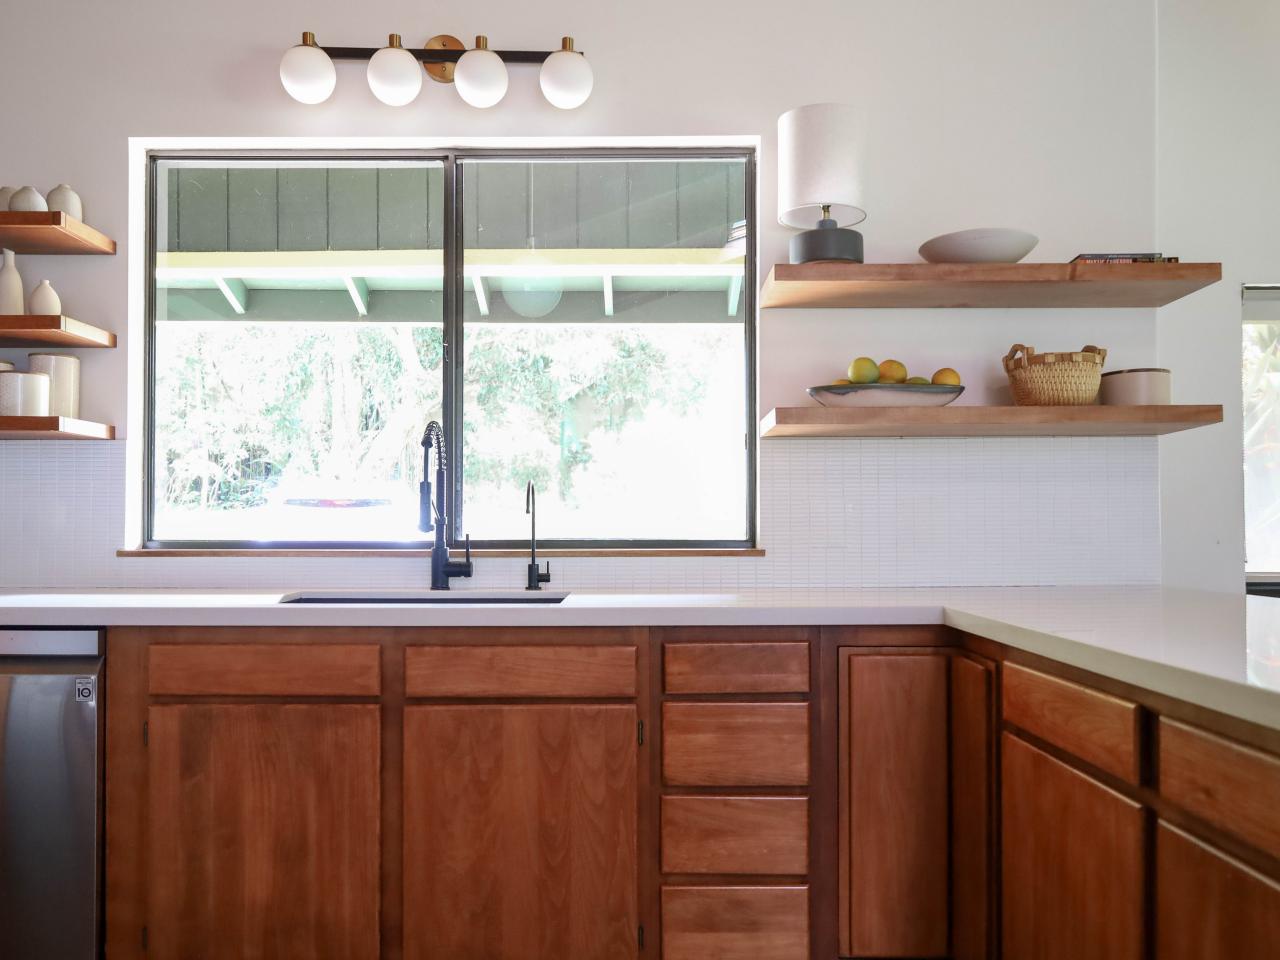 10 Ways to Redo Kitchen Cabinets Without Replacing Them - This Old